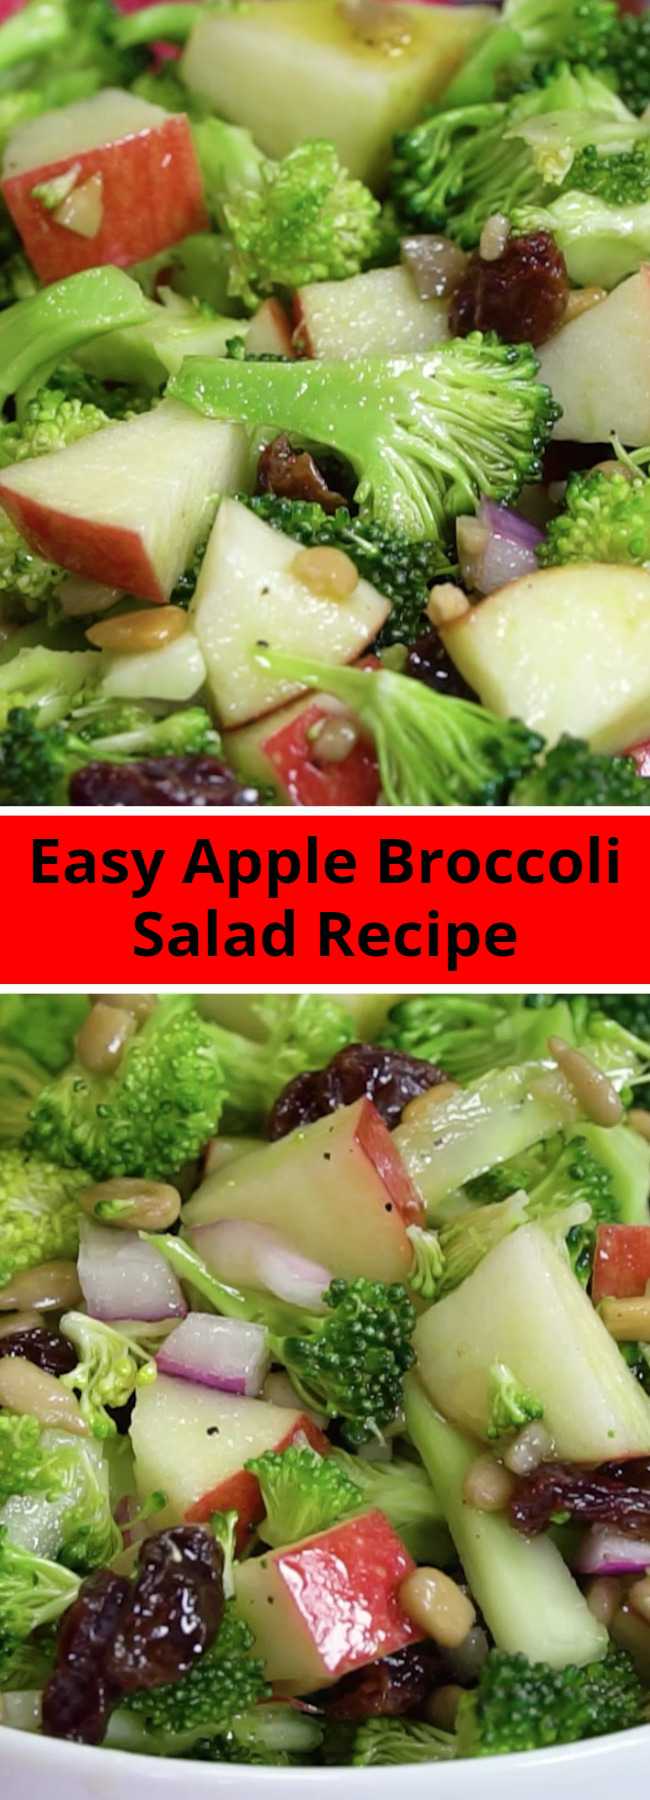 Easy Apple Broccoli Salad Recipe - Vegan Apple Broccoli Salad has everyone's favorite vegetables and fruits with a slightly sweet and tangy dressing. Easy, Healthy broccoli salad with raisins, apples and no mayo.